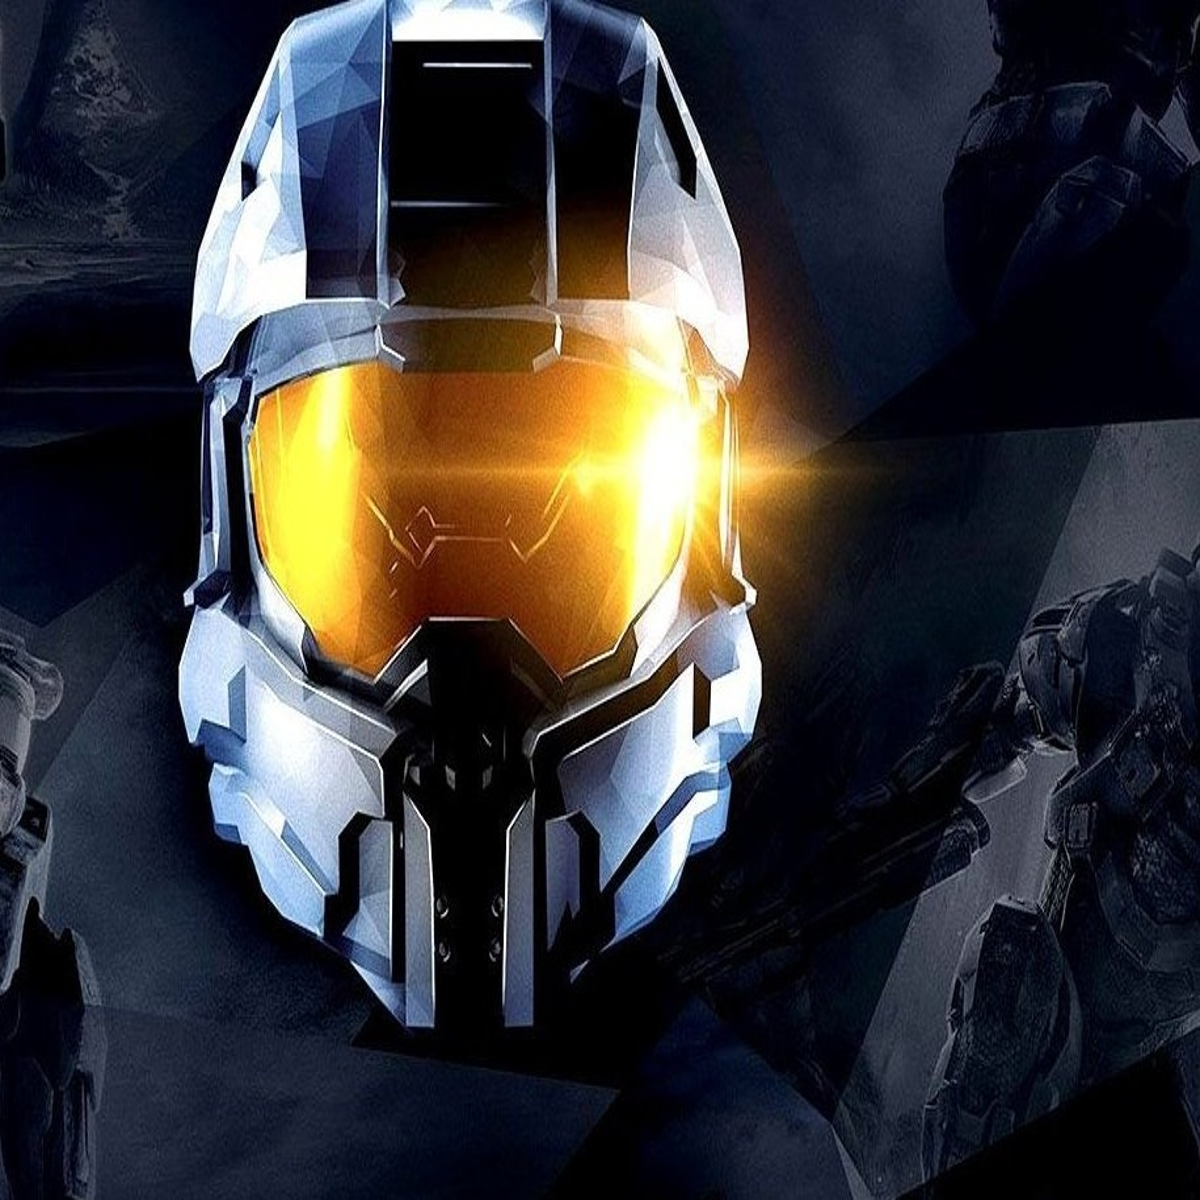 Halo TV Show—Showing Master Chief's Face Is Its Smartest Choice